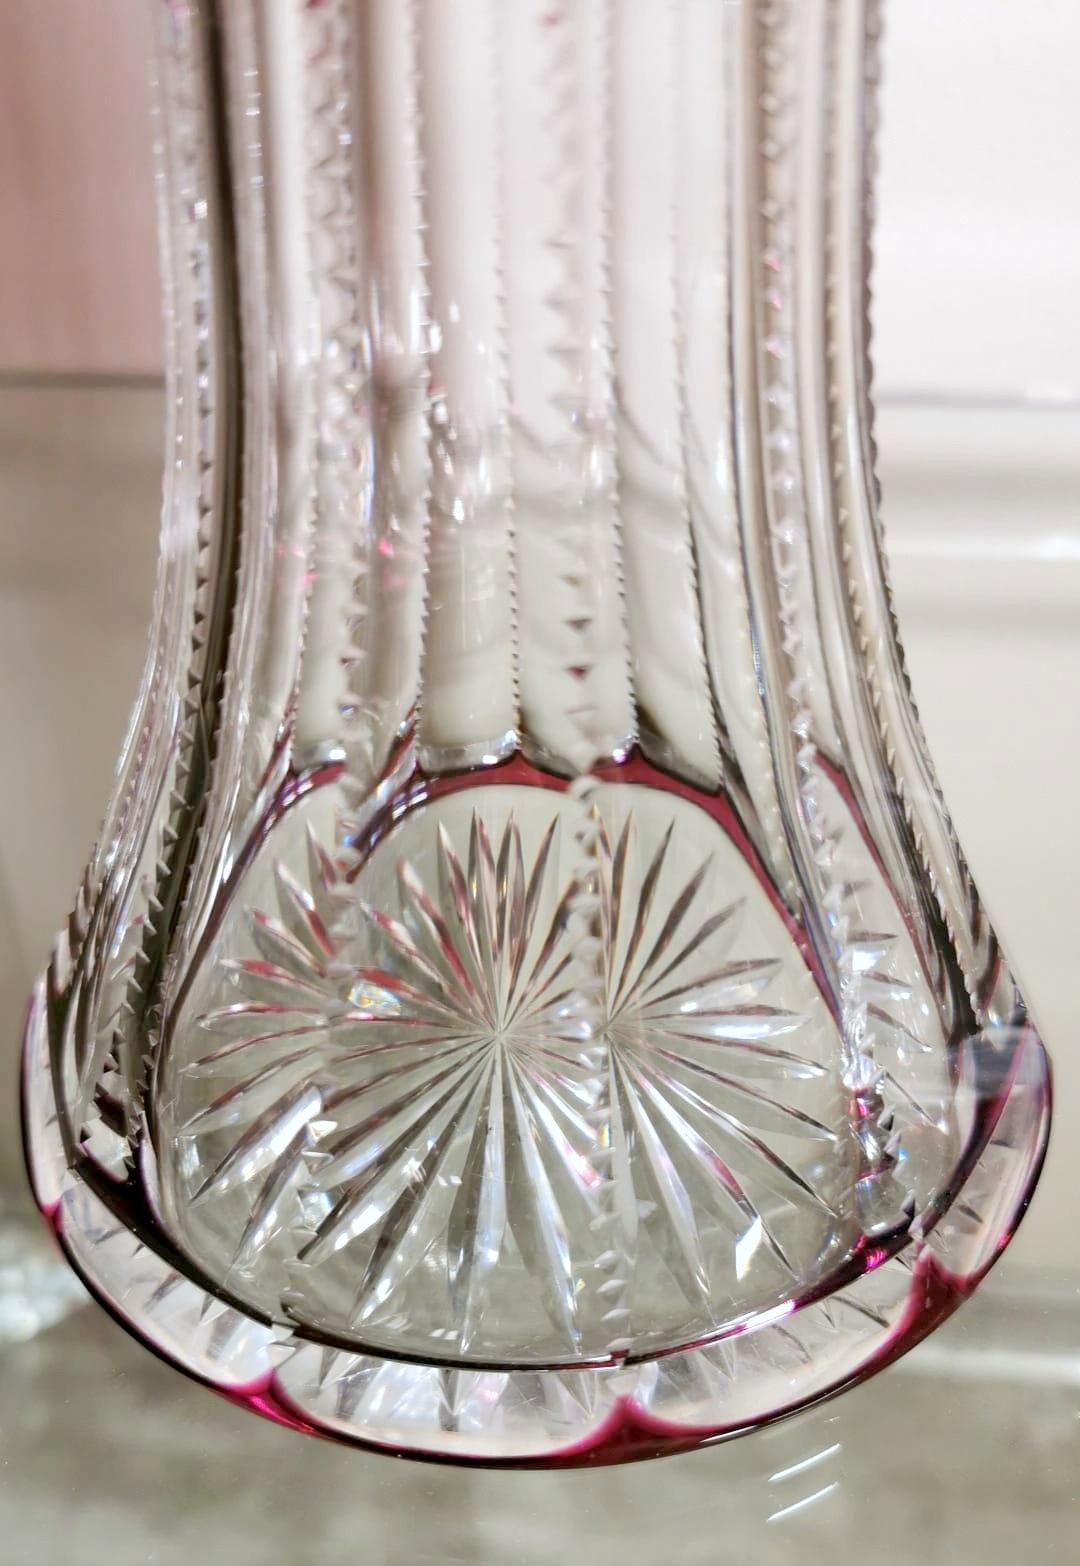 Art Deco Saint Louis Style Pair of French Cut and Grinded Lead Crystal Vases For Sale 4